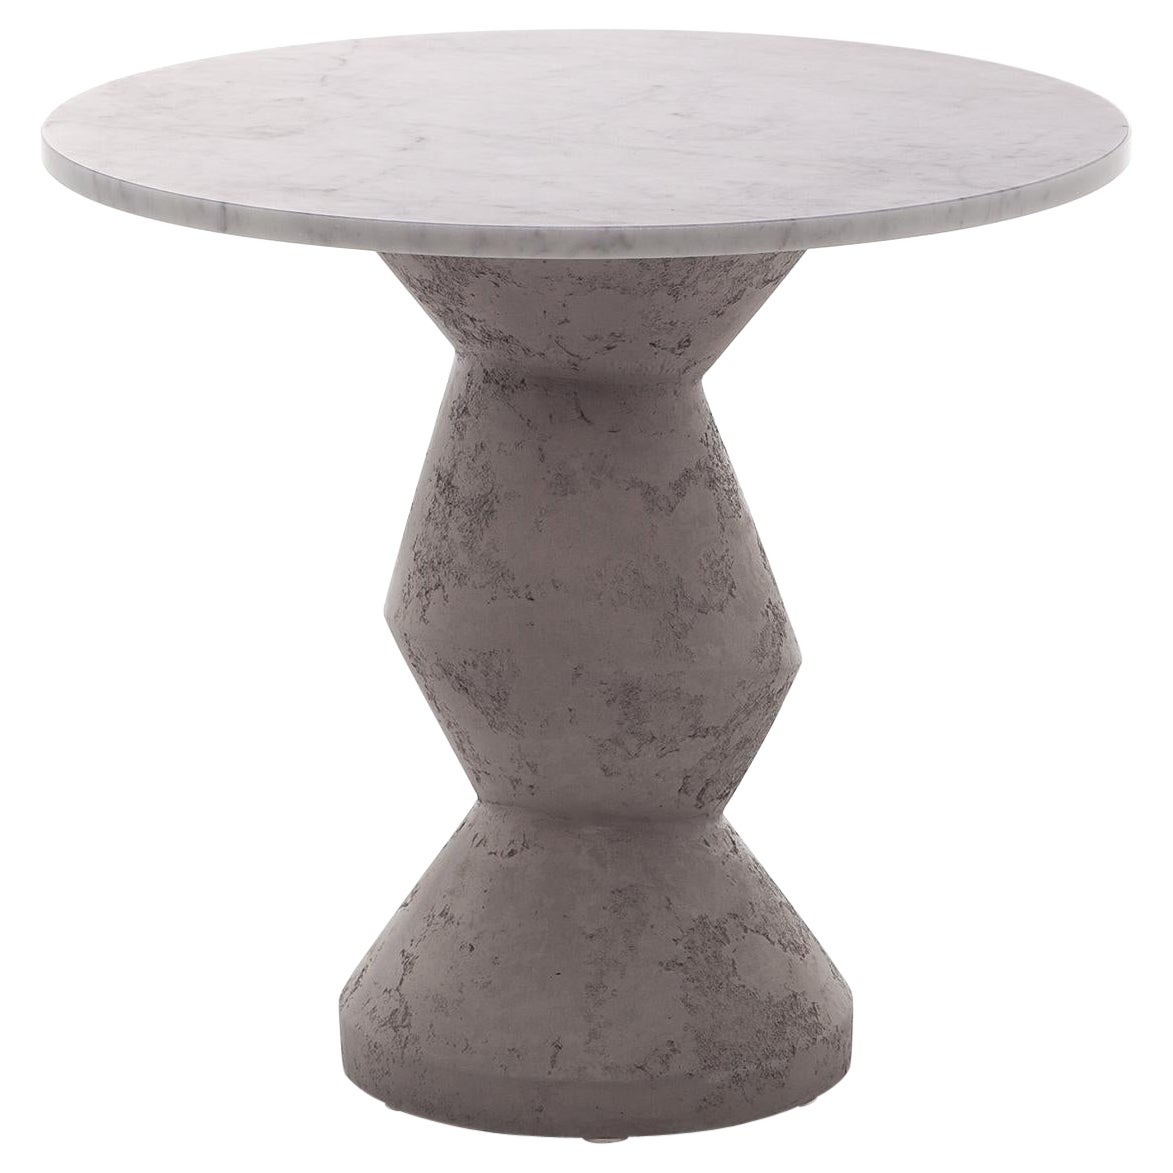 Gervasoni Large Inout 838 Table in White Carrara Marble Top & Crackle Concrete For Sale